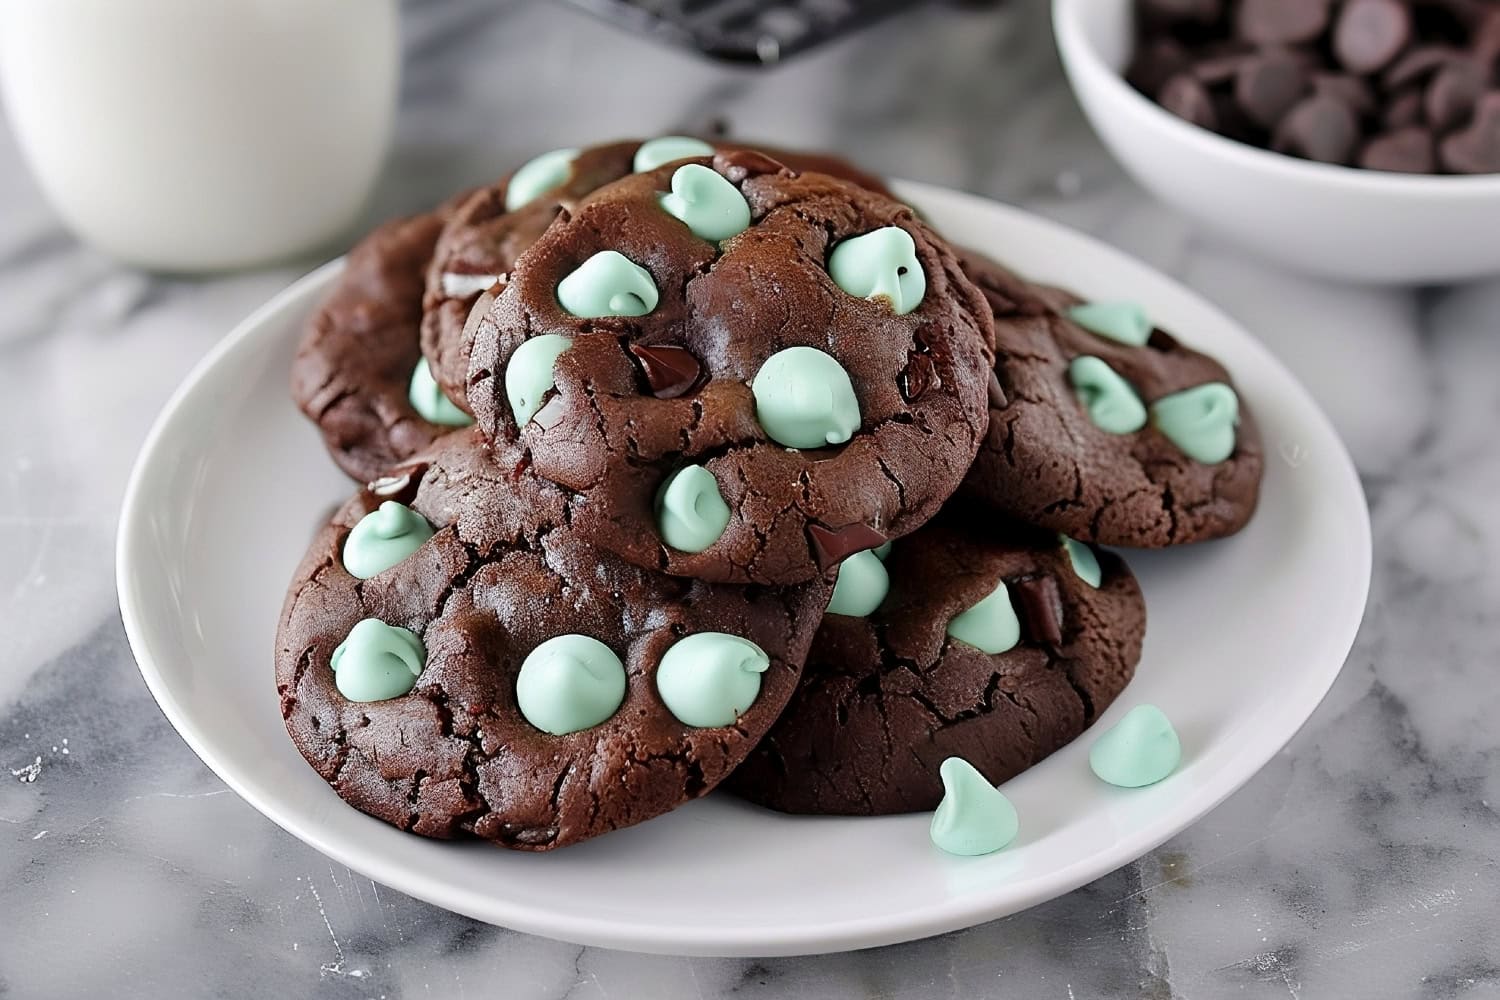 A plate of cookies with green and brown chips served with milk on a white marble countertop.